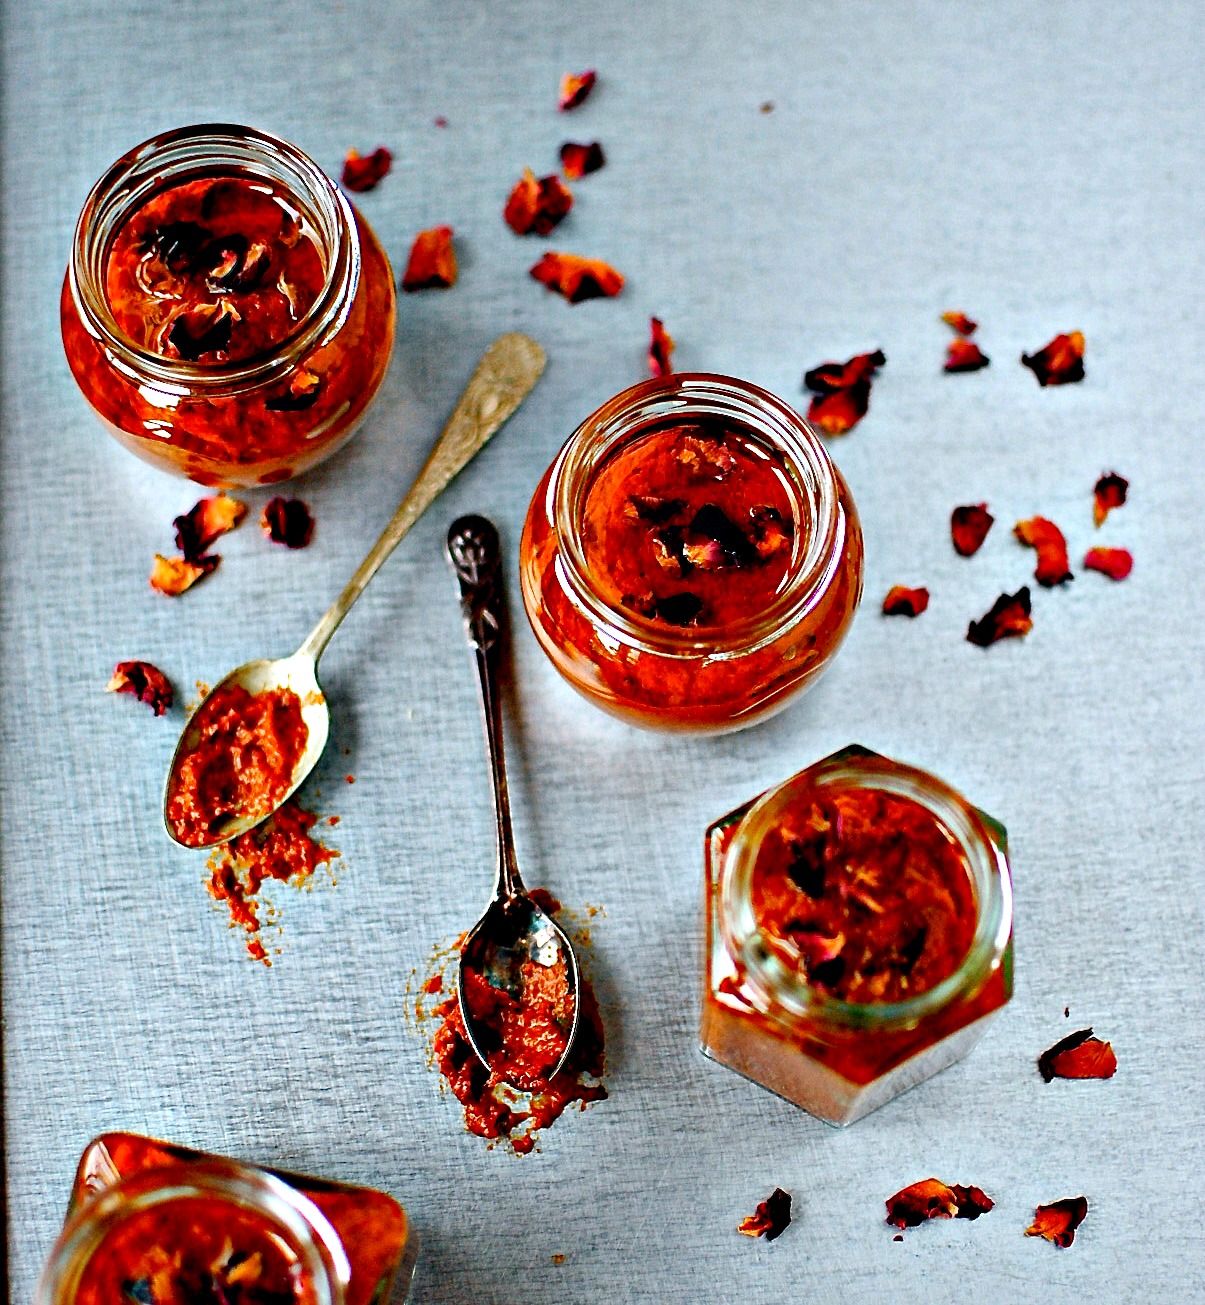 How to Make Rose Harissa Paste - Non-Guilty Pleasures